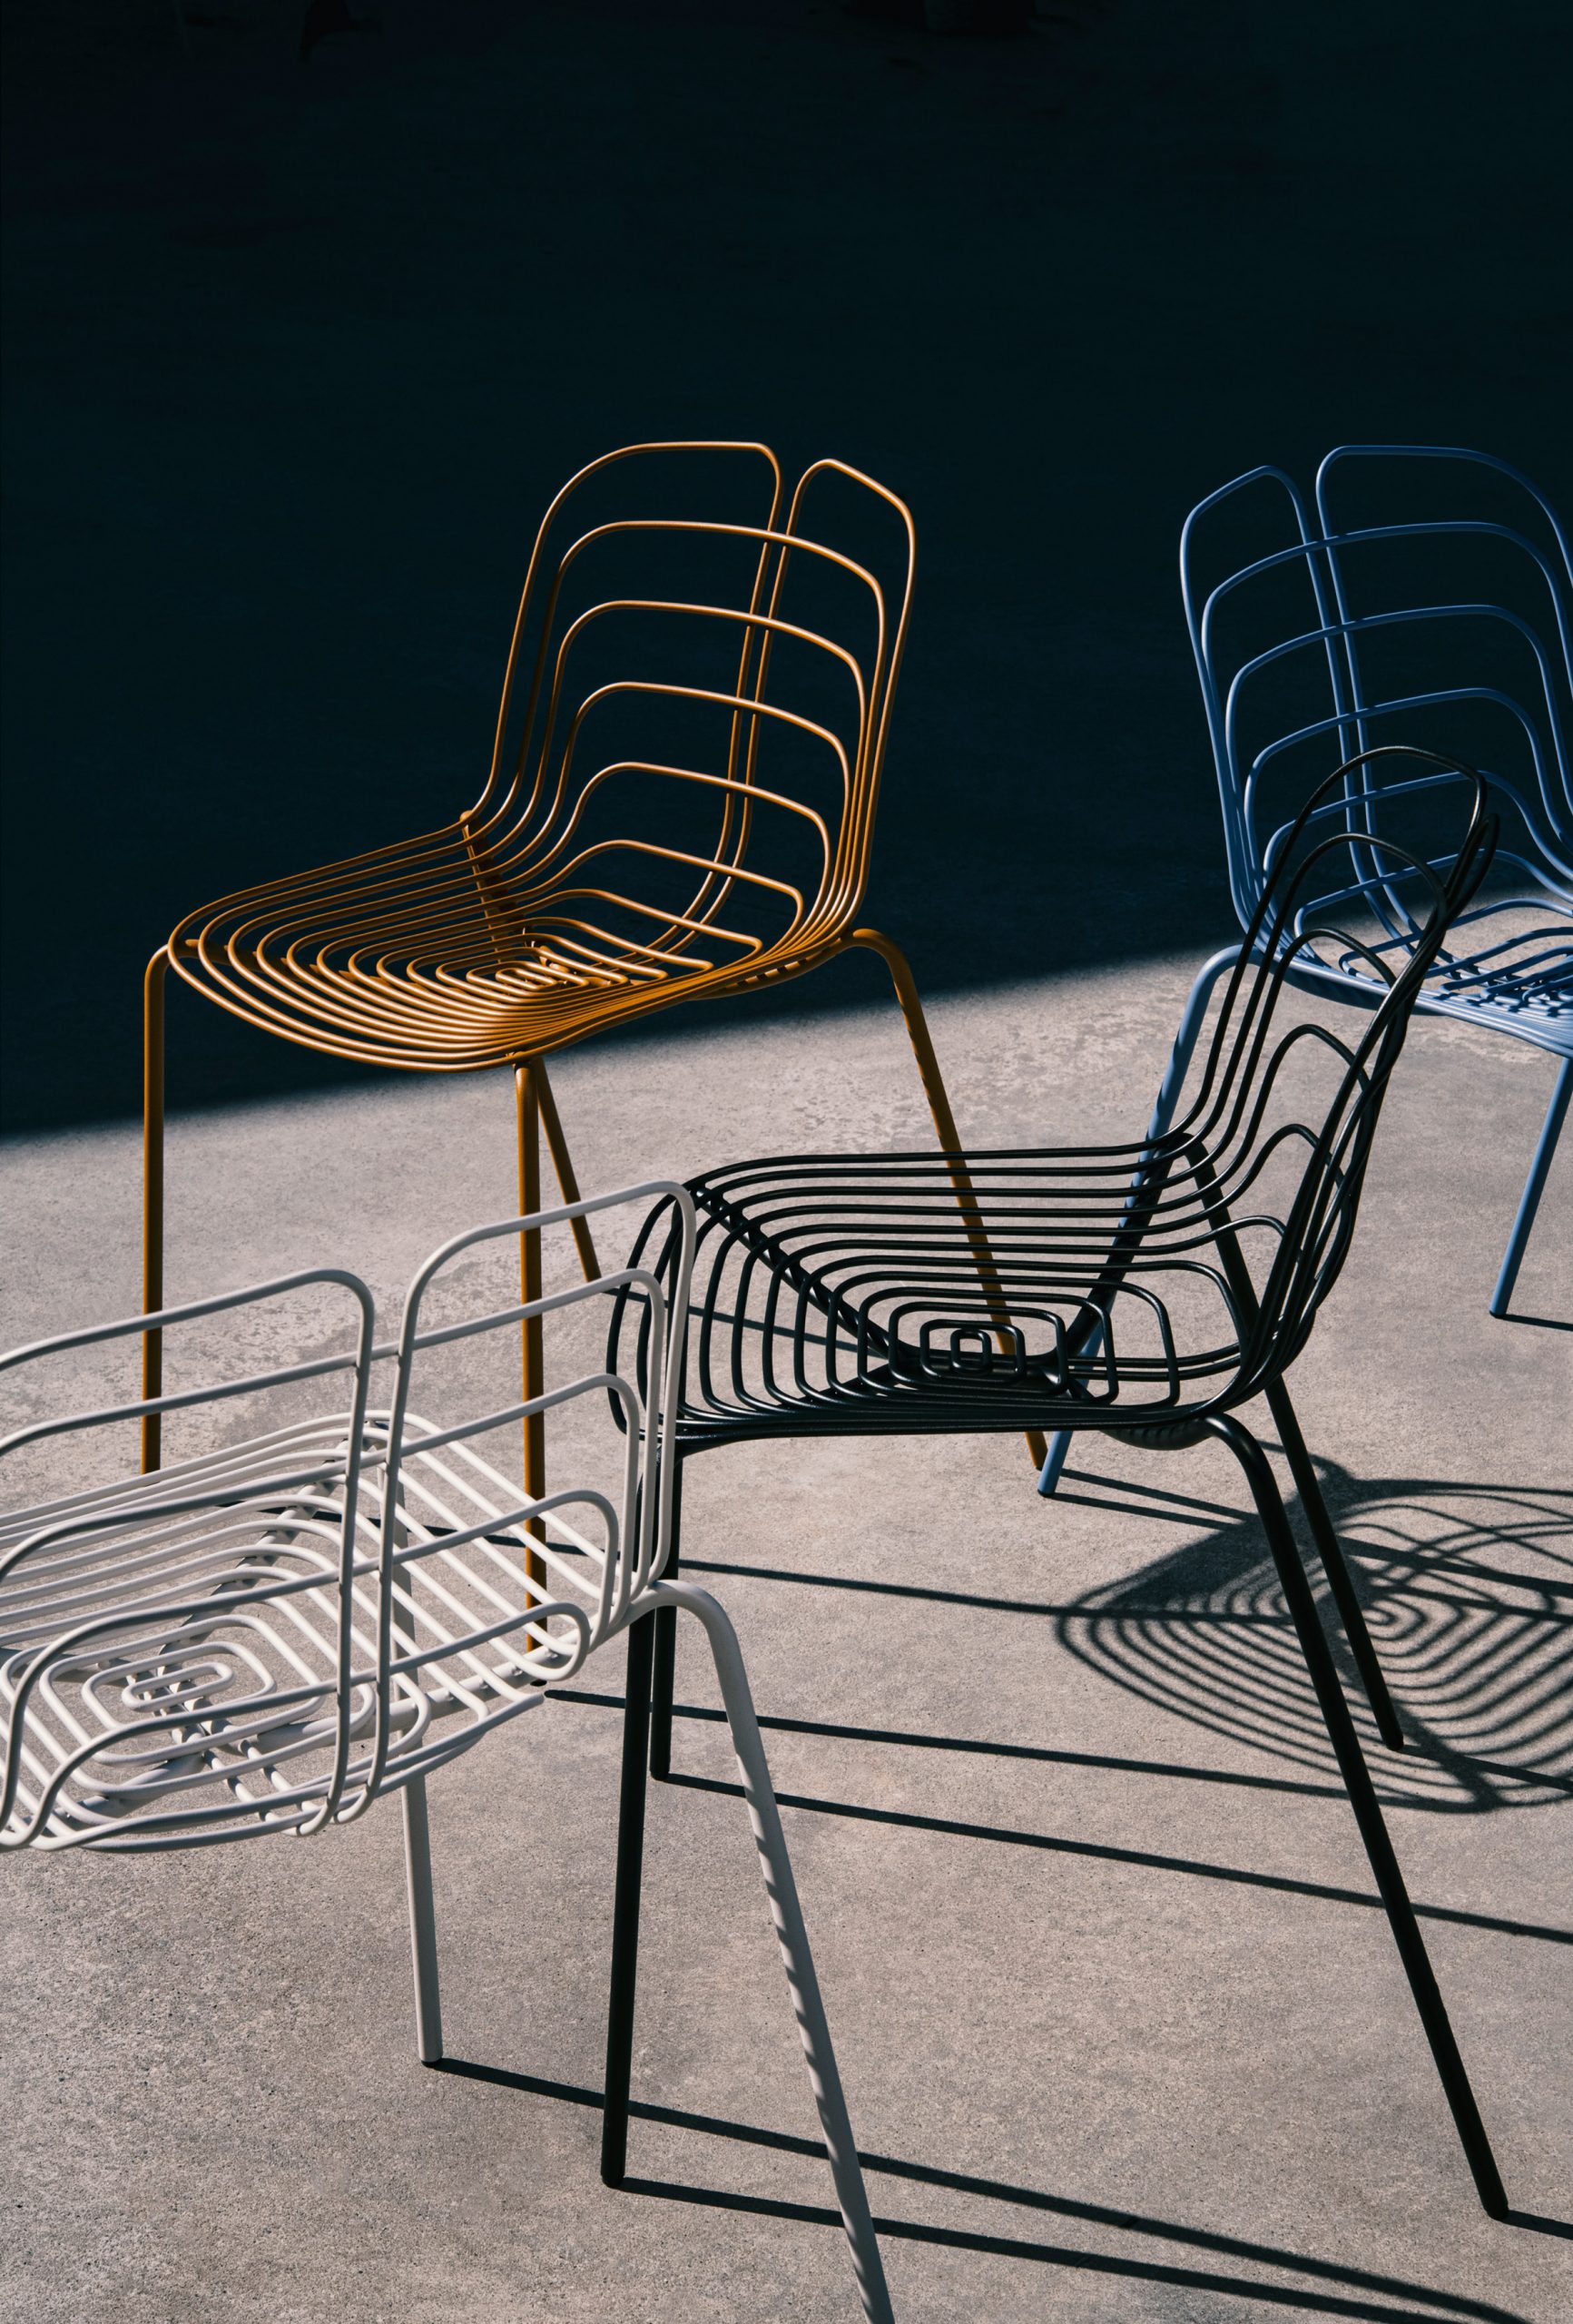 Four Wired chairs in white, black, blue and bronze